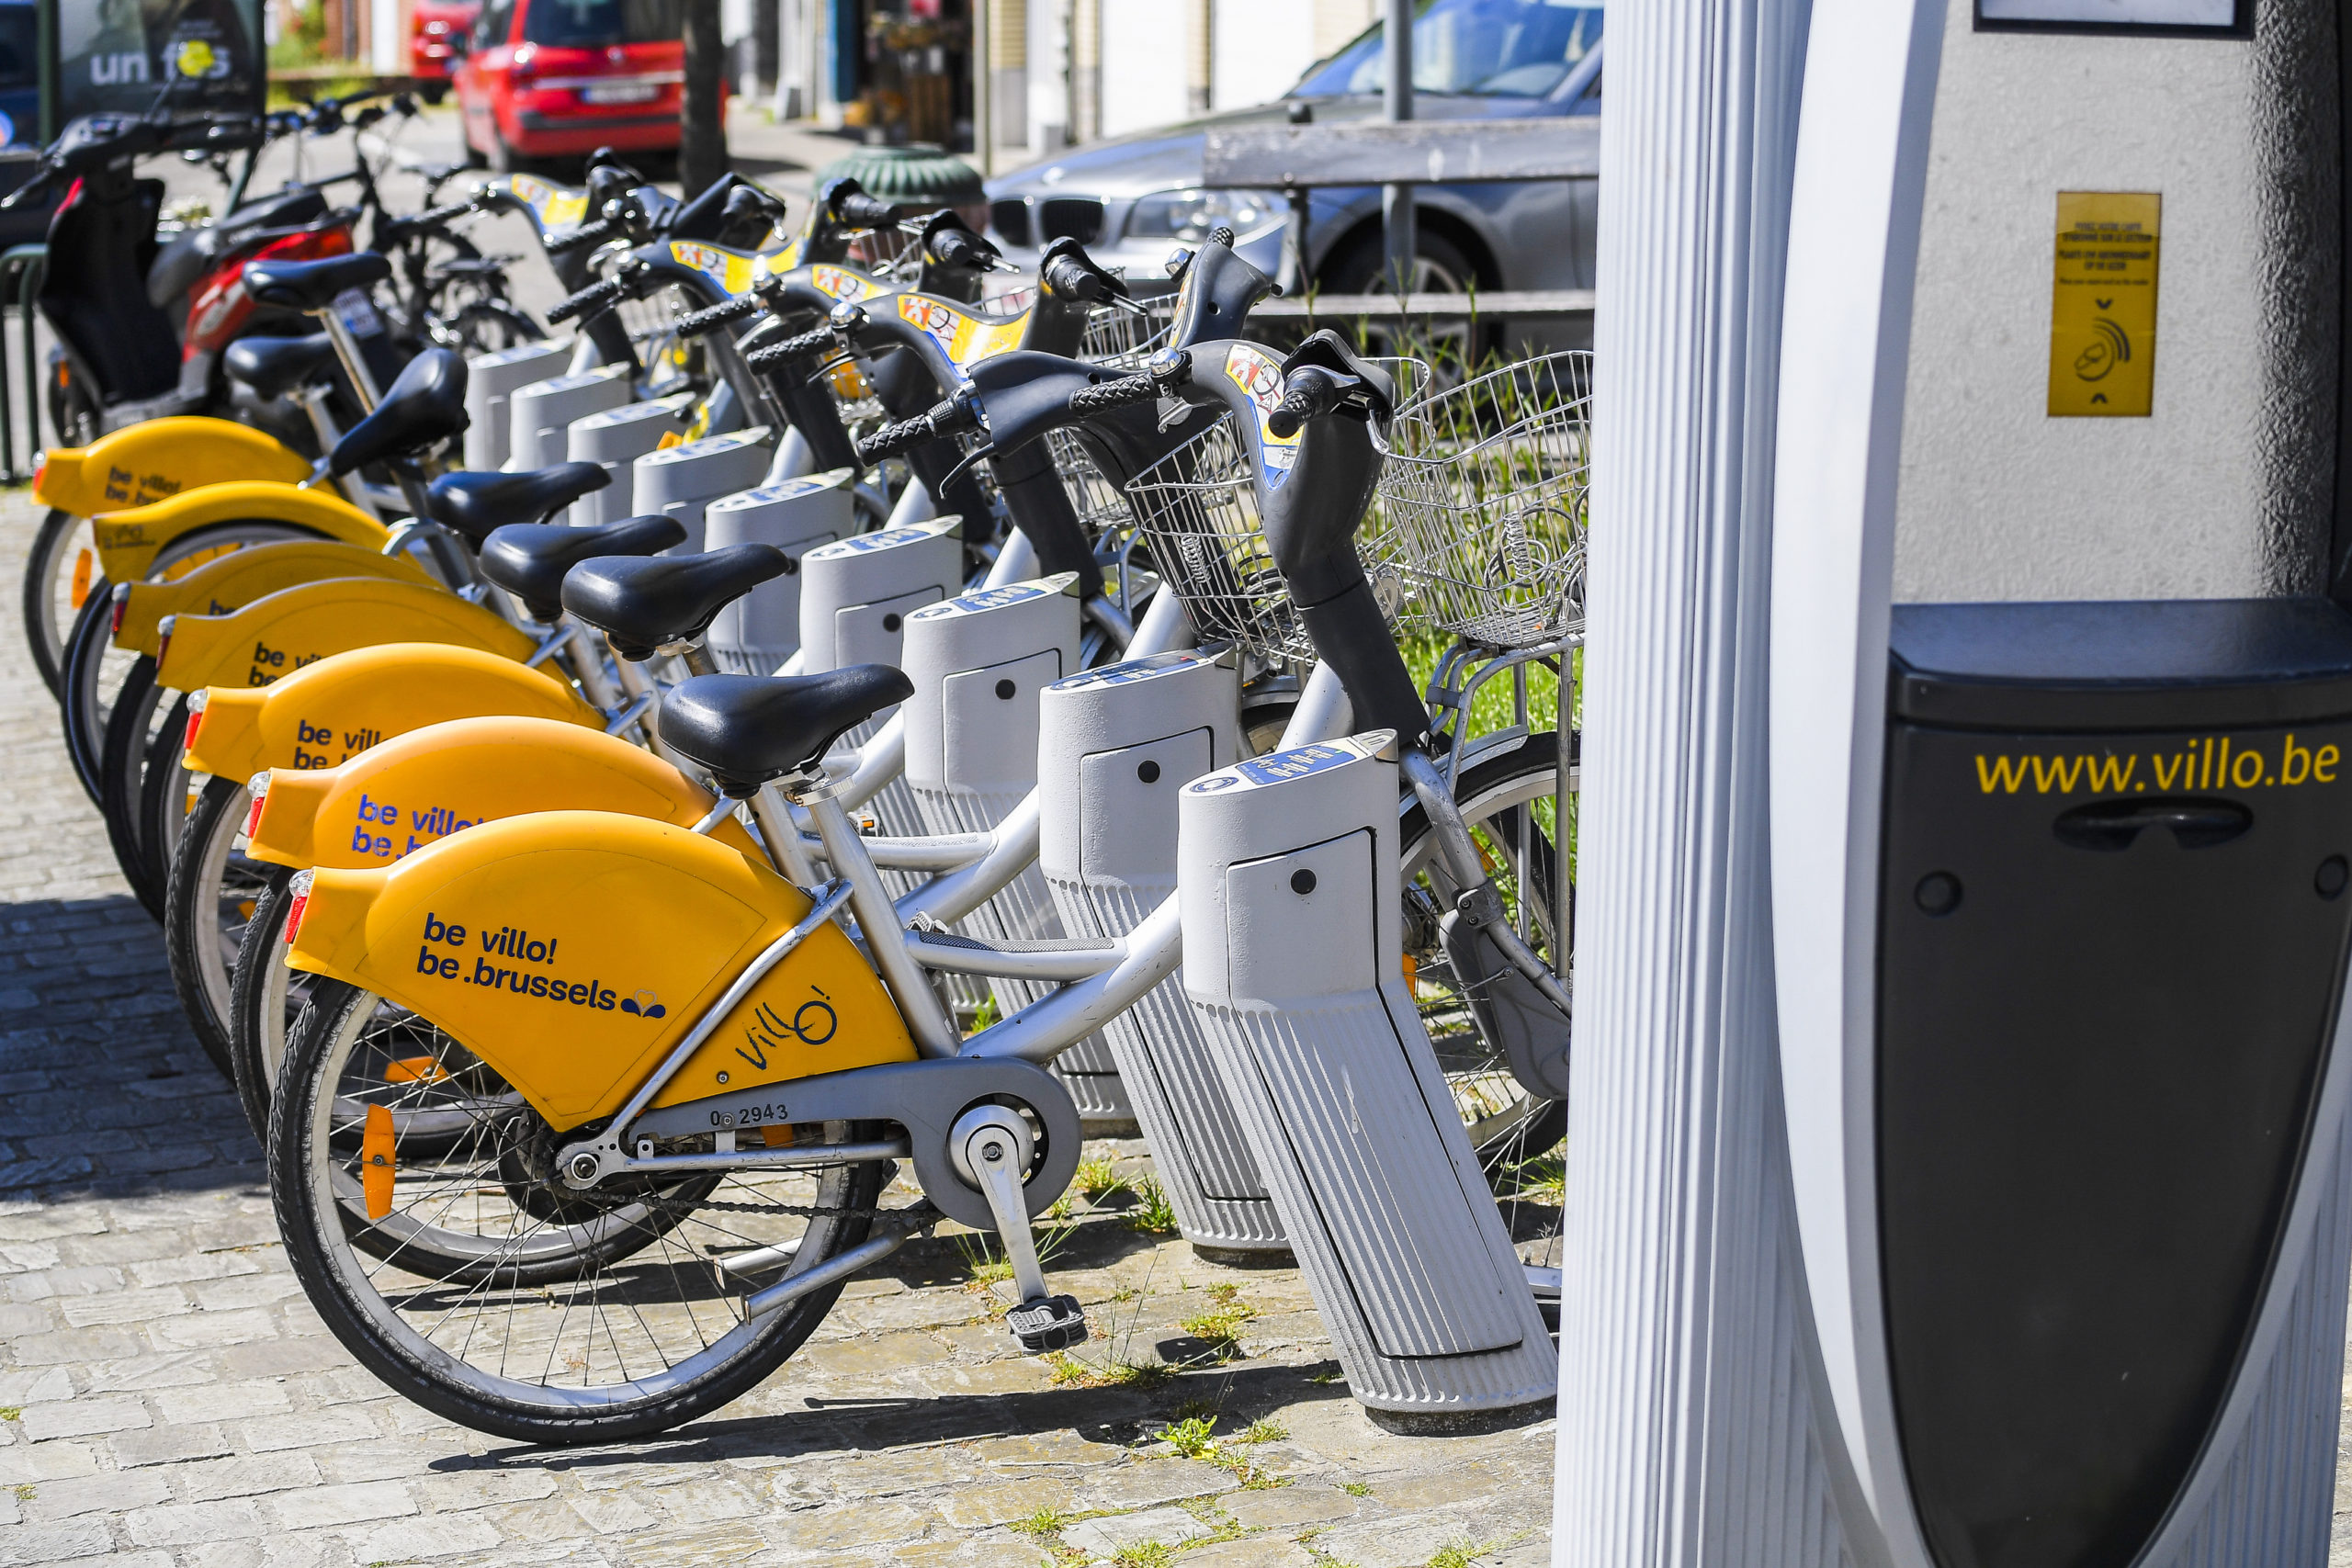 Brussels’ Villo! to launch e-bike booking service